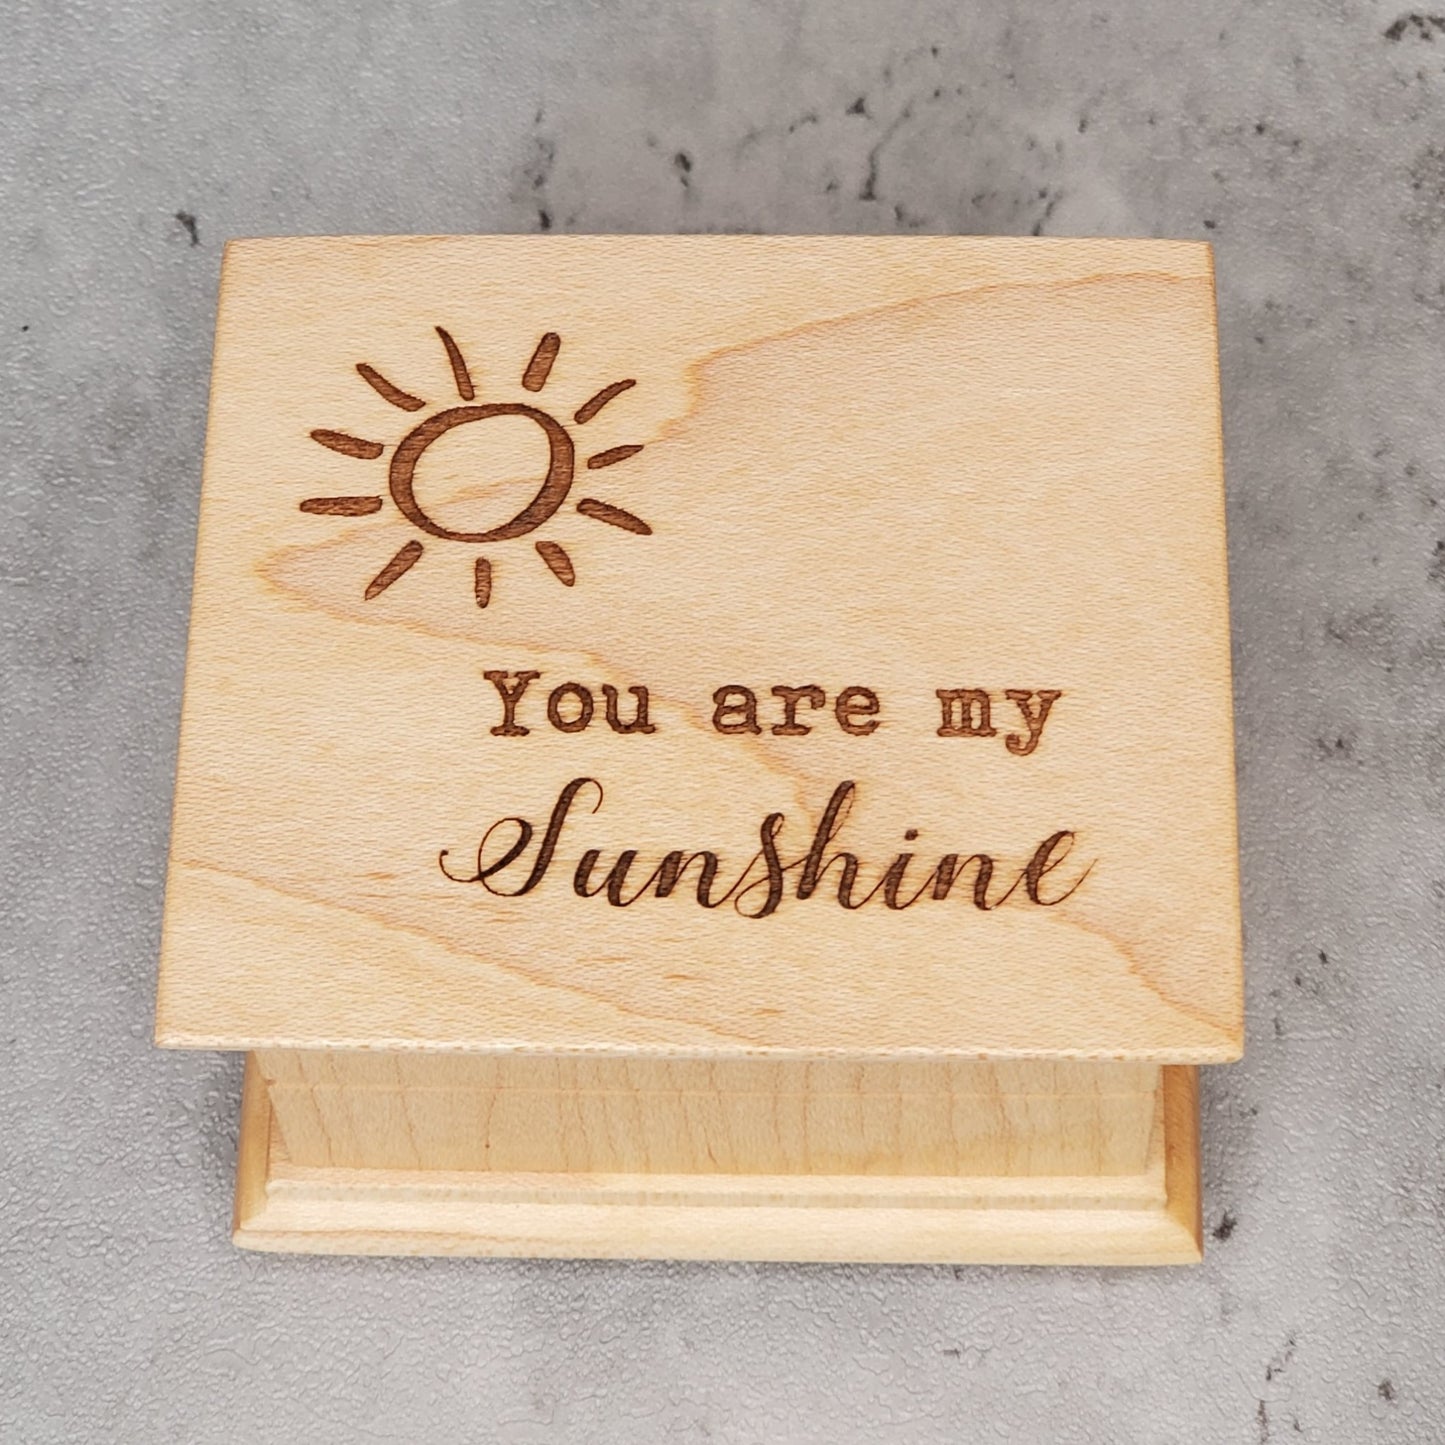 You are my sunshine music box, wooden music box with You are my sunshine engraved on top with sun drawing, choose color and song